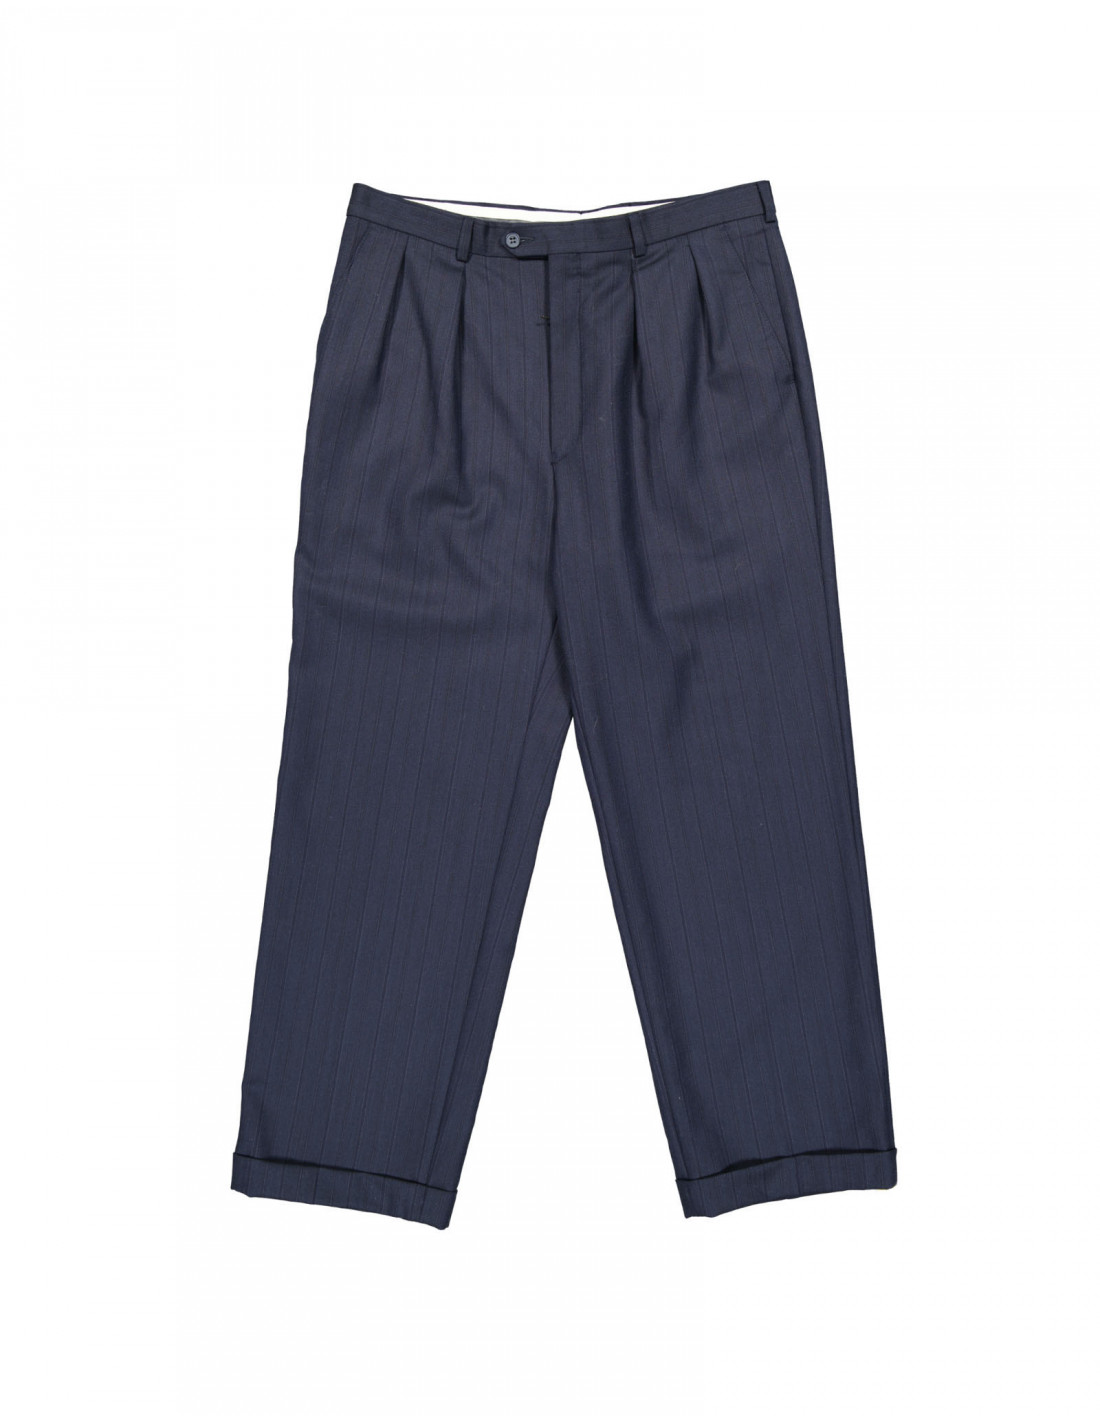 https://think2.eu/1951555-thickbox_default/christian-dior-men-s-pleated-trousers.jpg